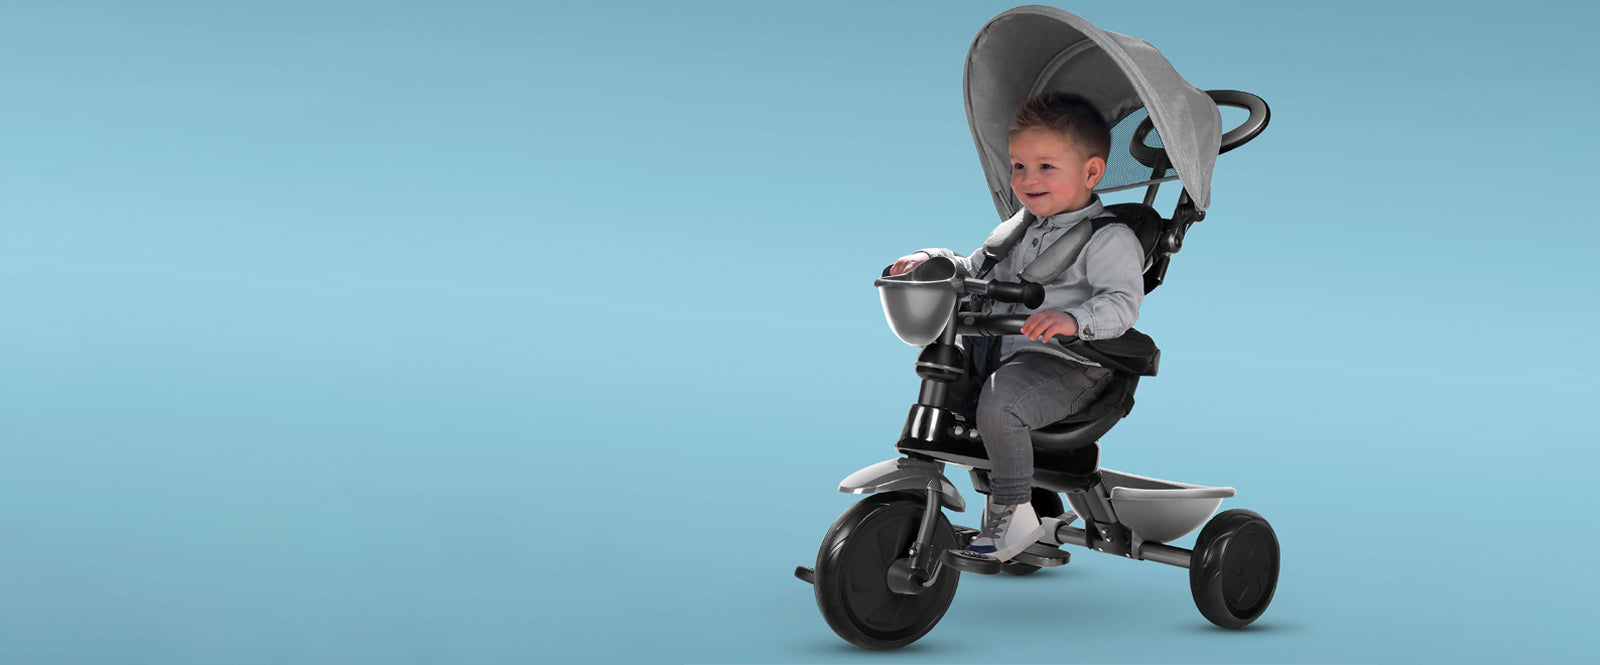 Little boy riding on a Kettler Happy Navigator 4 in 1 tricycle.